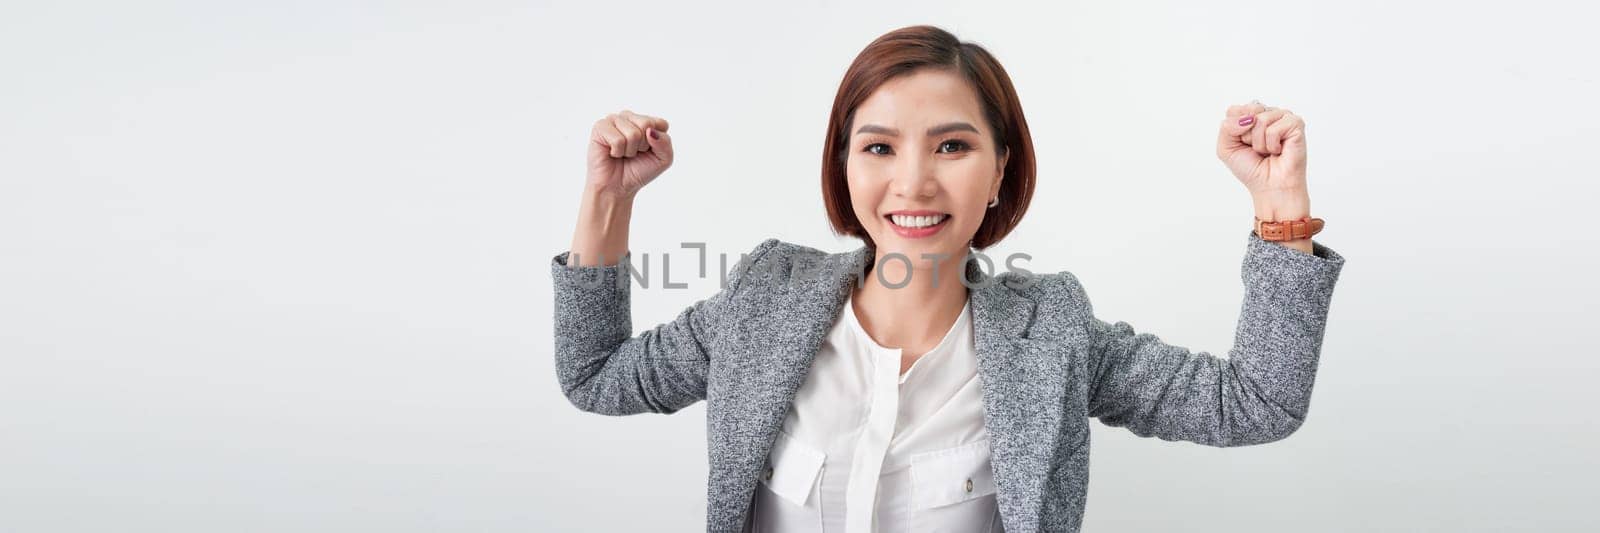 Successful business woman with arms up - isolated over a white background. banner